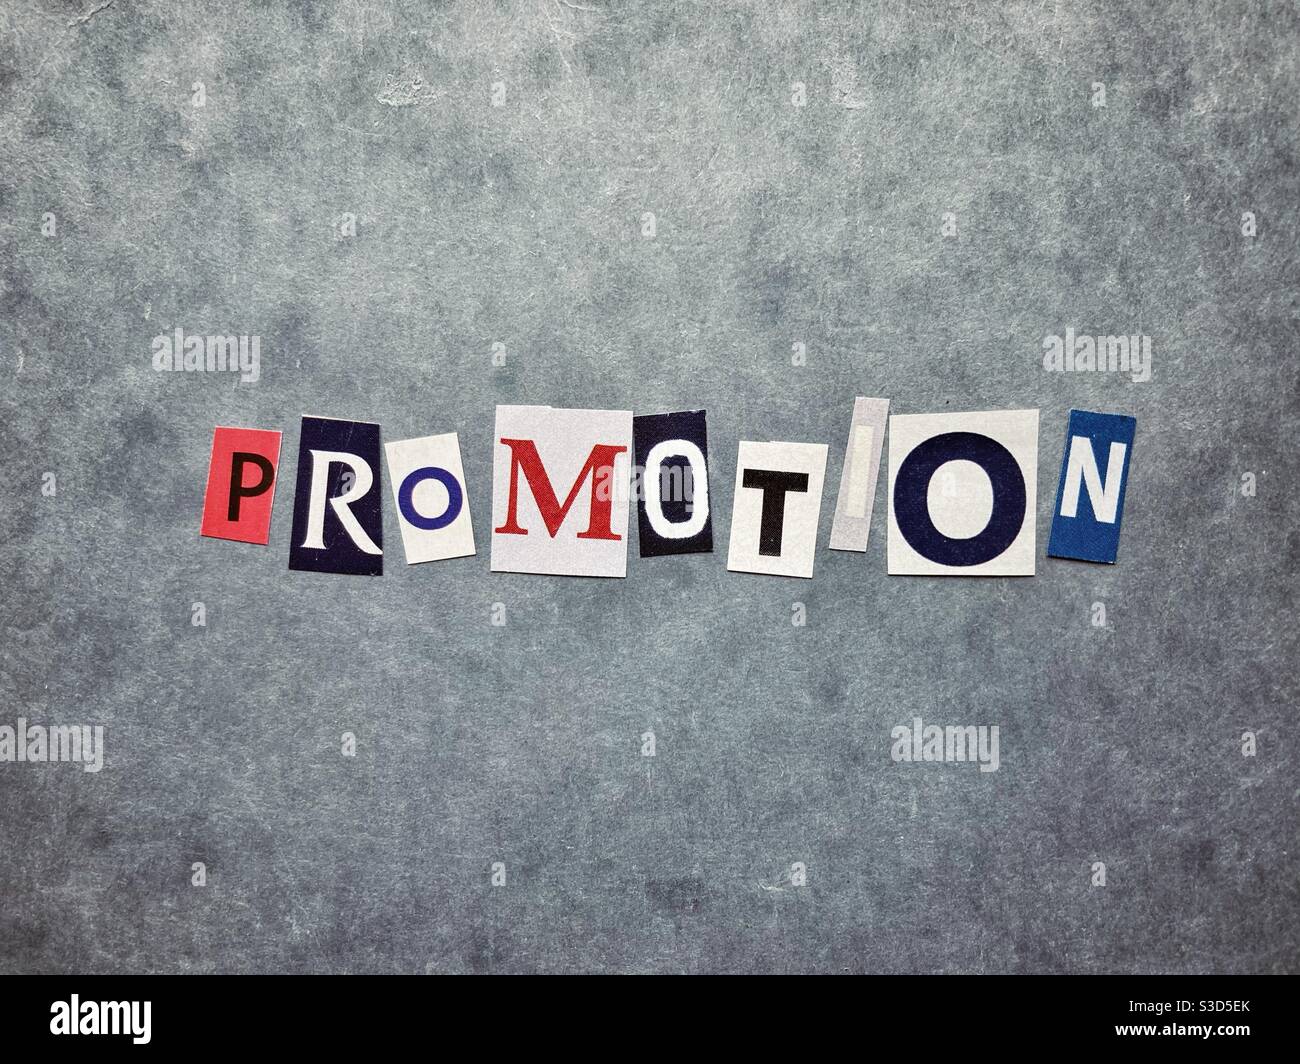 Promotion Concept Word Stock Photo